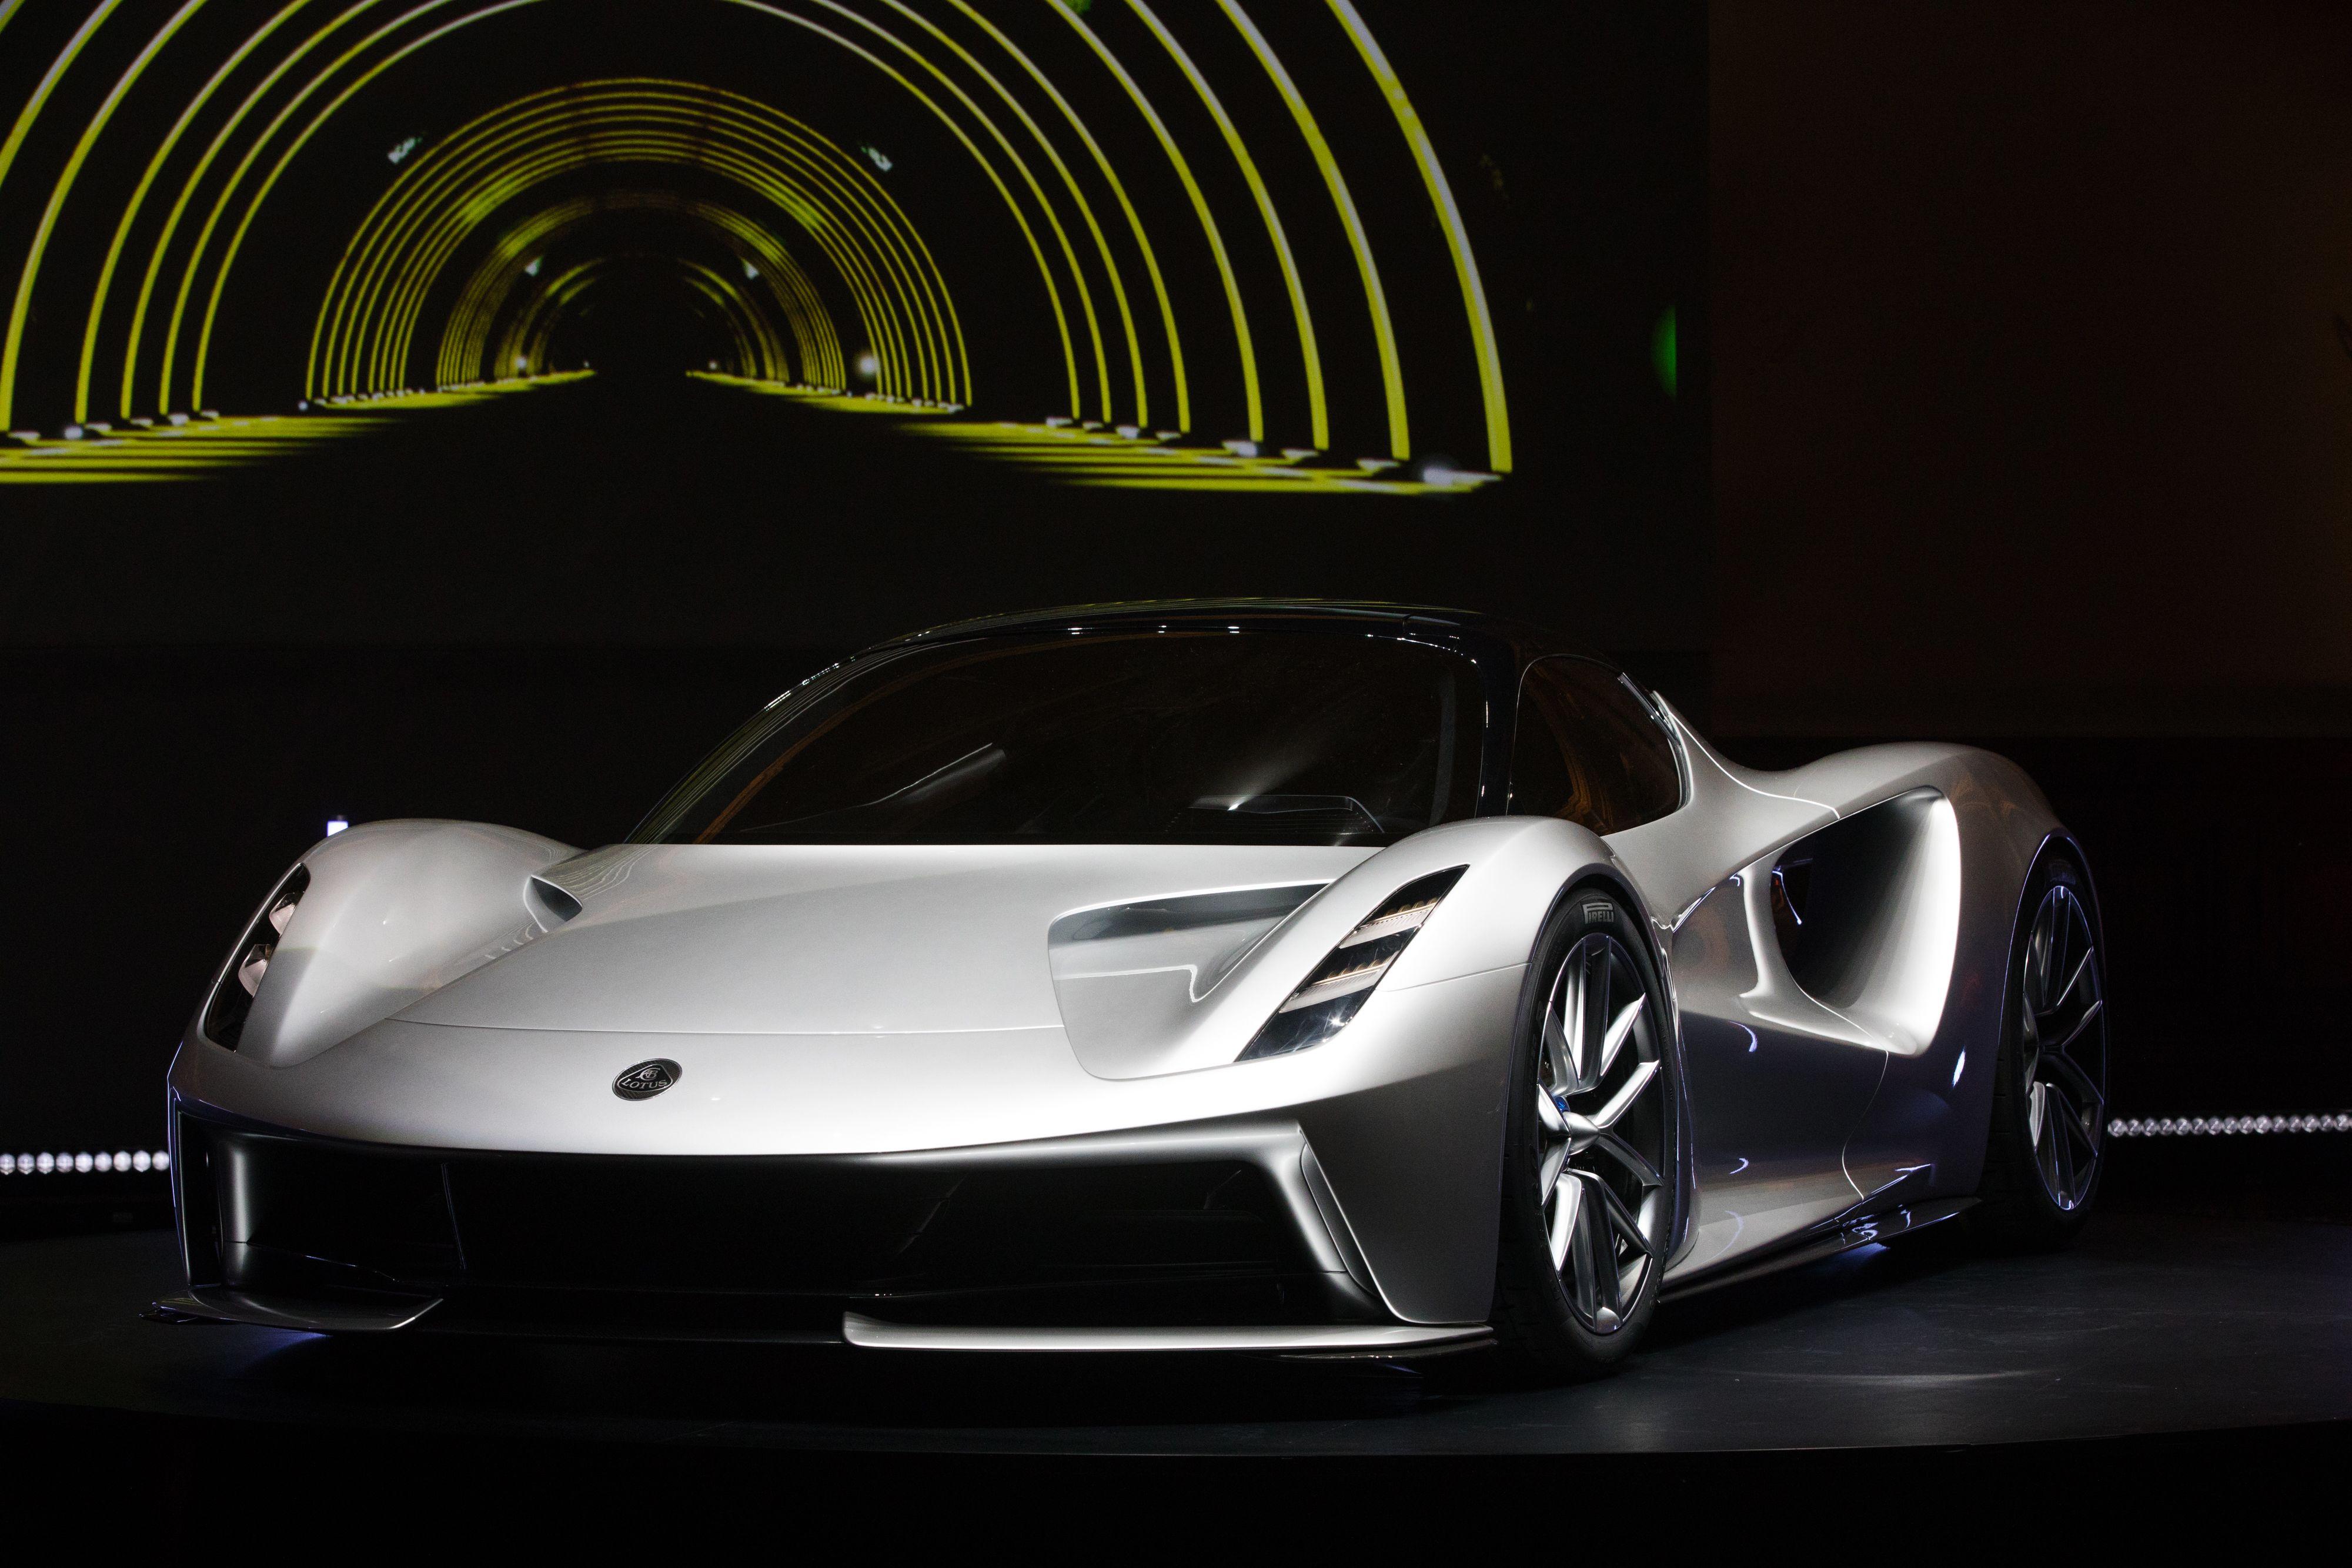 Lotus ups ante on electric hypercar with Evija: 000 hp